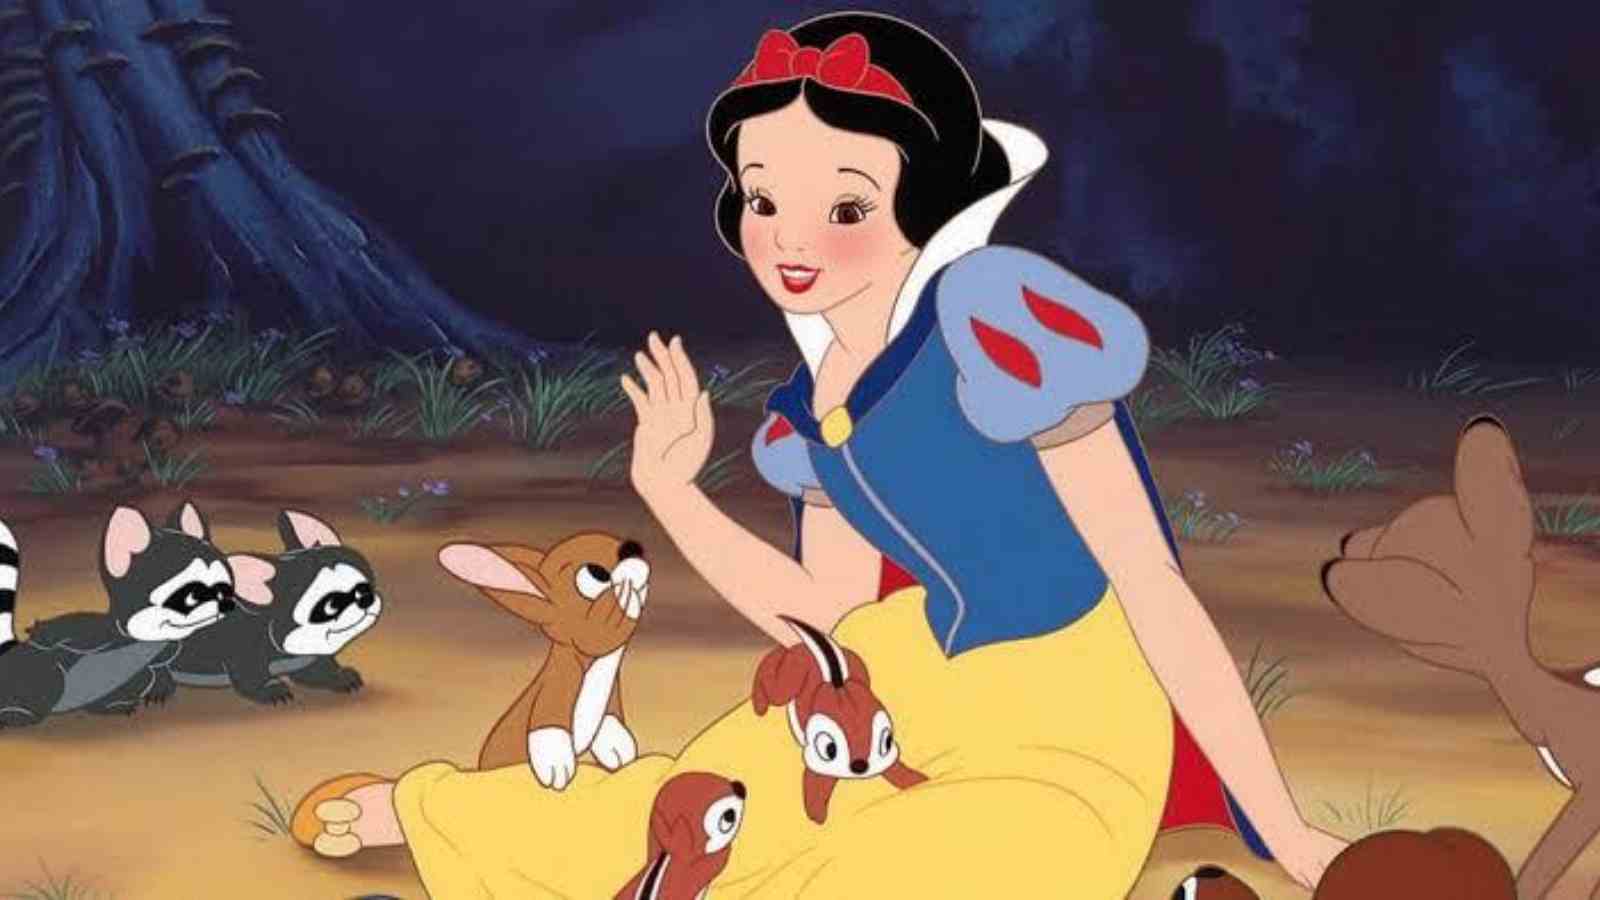 Snow White live action remake is currently in the works by Disney